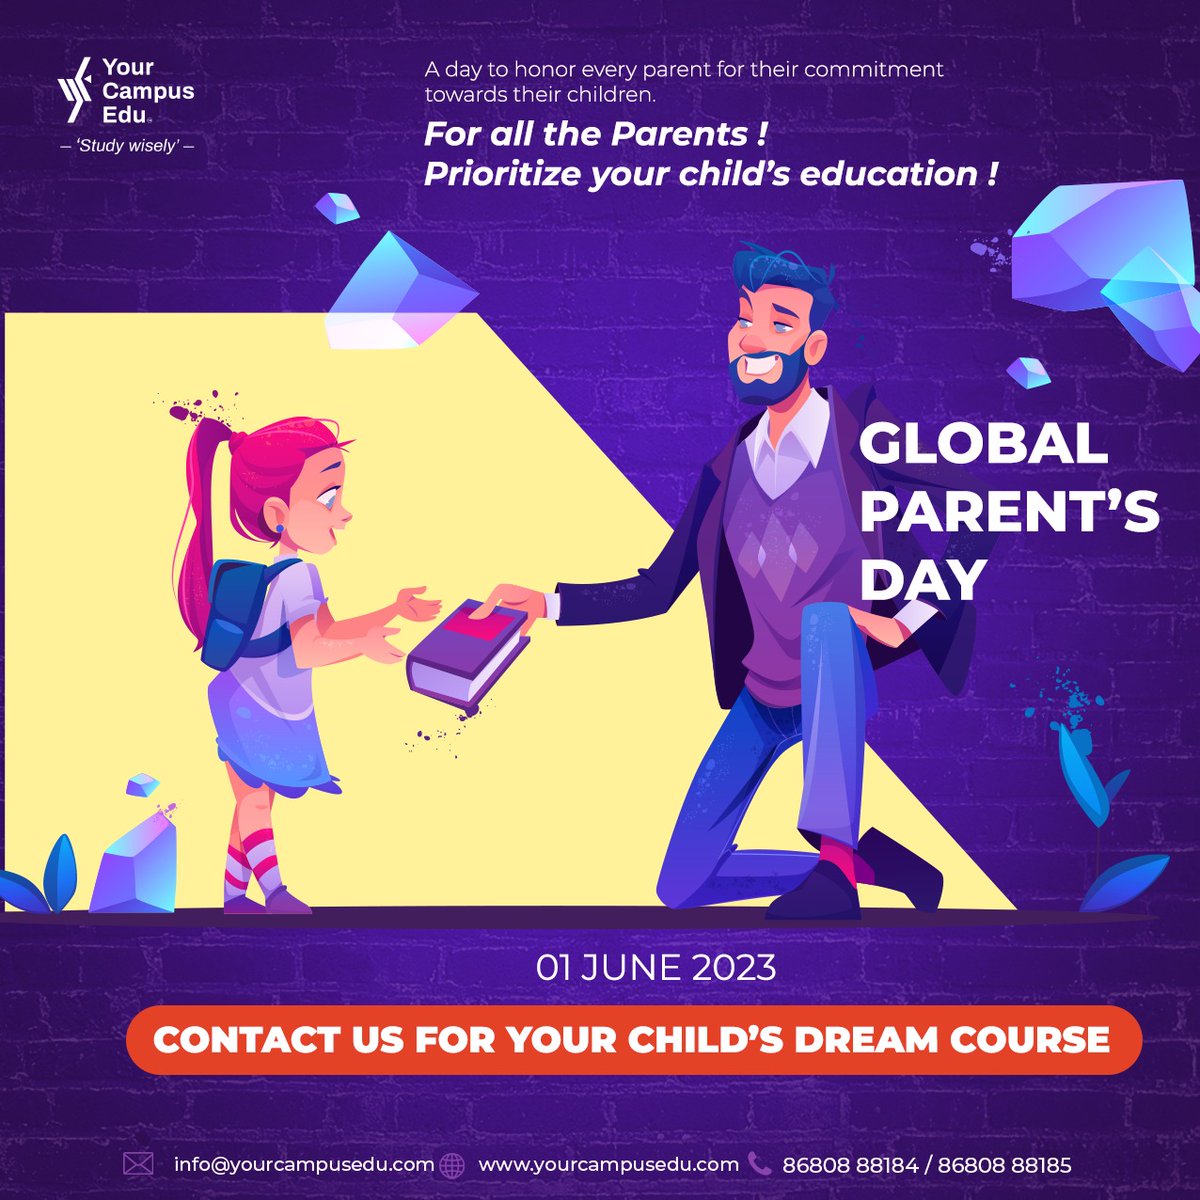 Parents—the ultimate superheroes without capes! 

#mbaadmission #NursingAdmissions #AdmissionsOpen #EngineeringAdmissions #educationalconsulting #educationalconsultancy  #admissionprocess #loanassistance #loanoptions #LoanConsulting #globalparentsday #parentsday